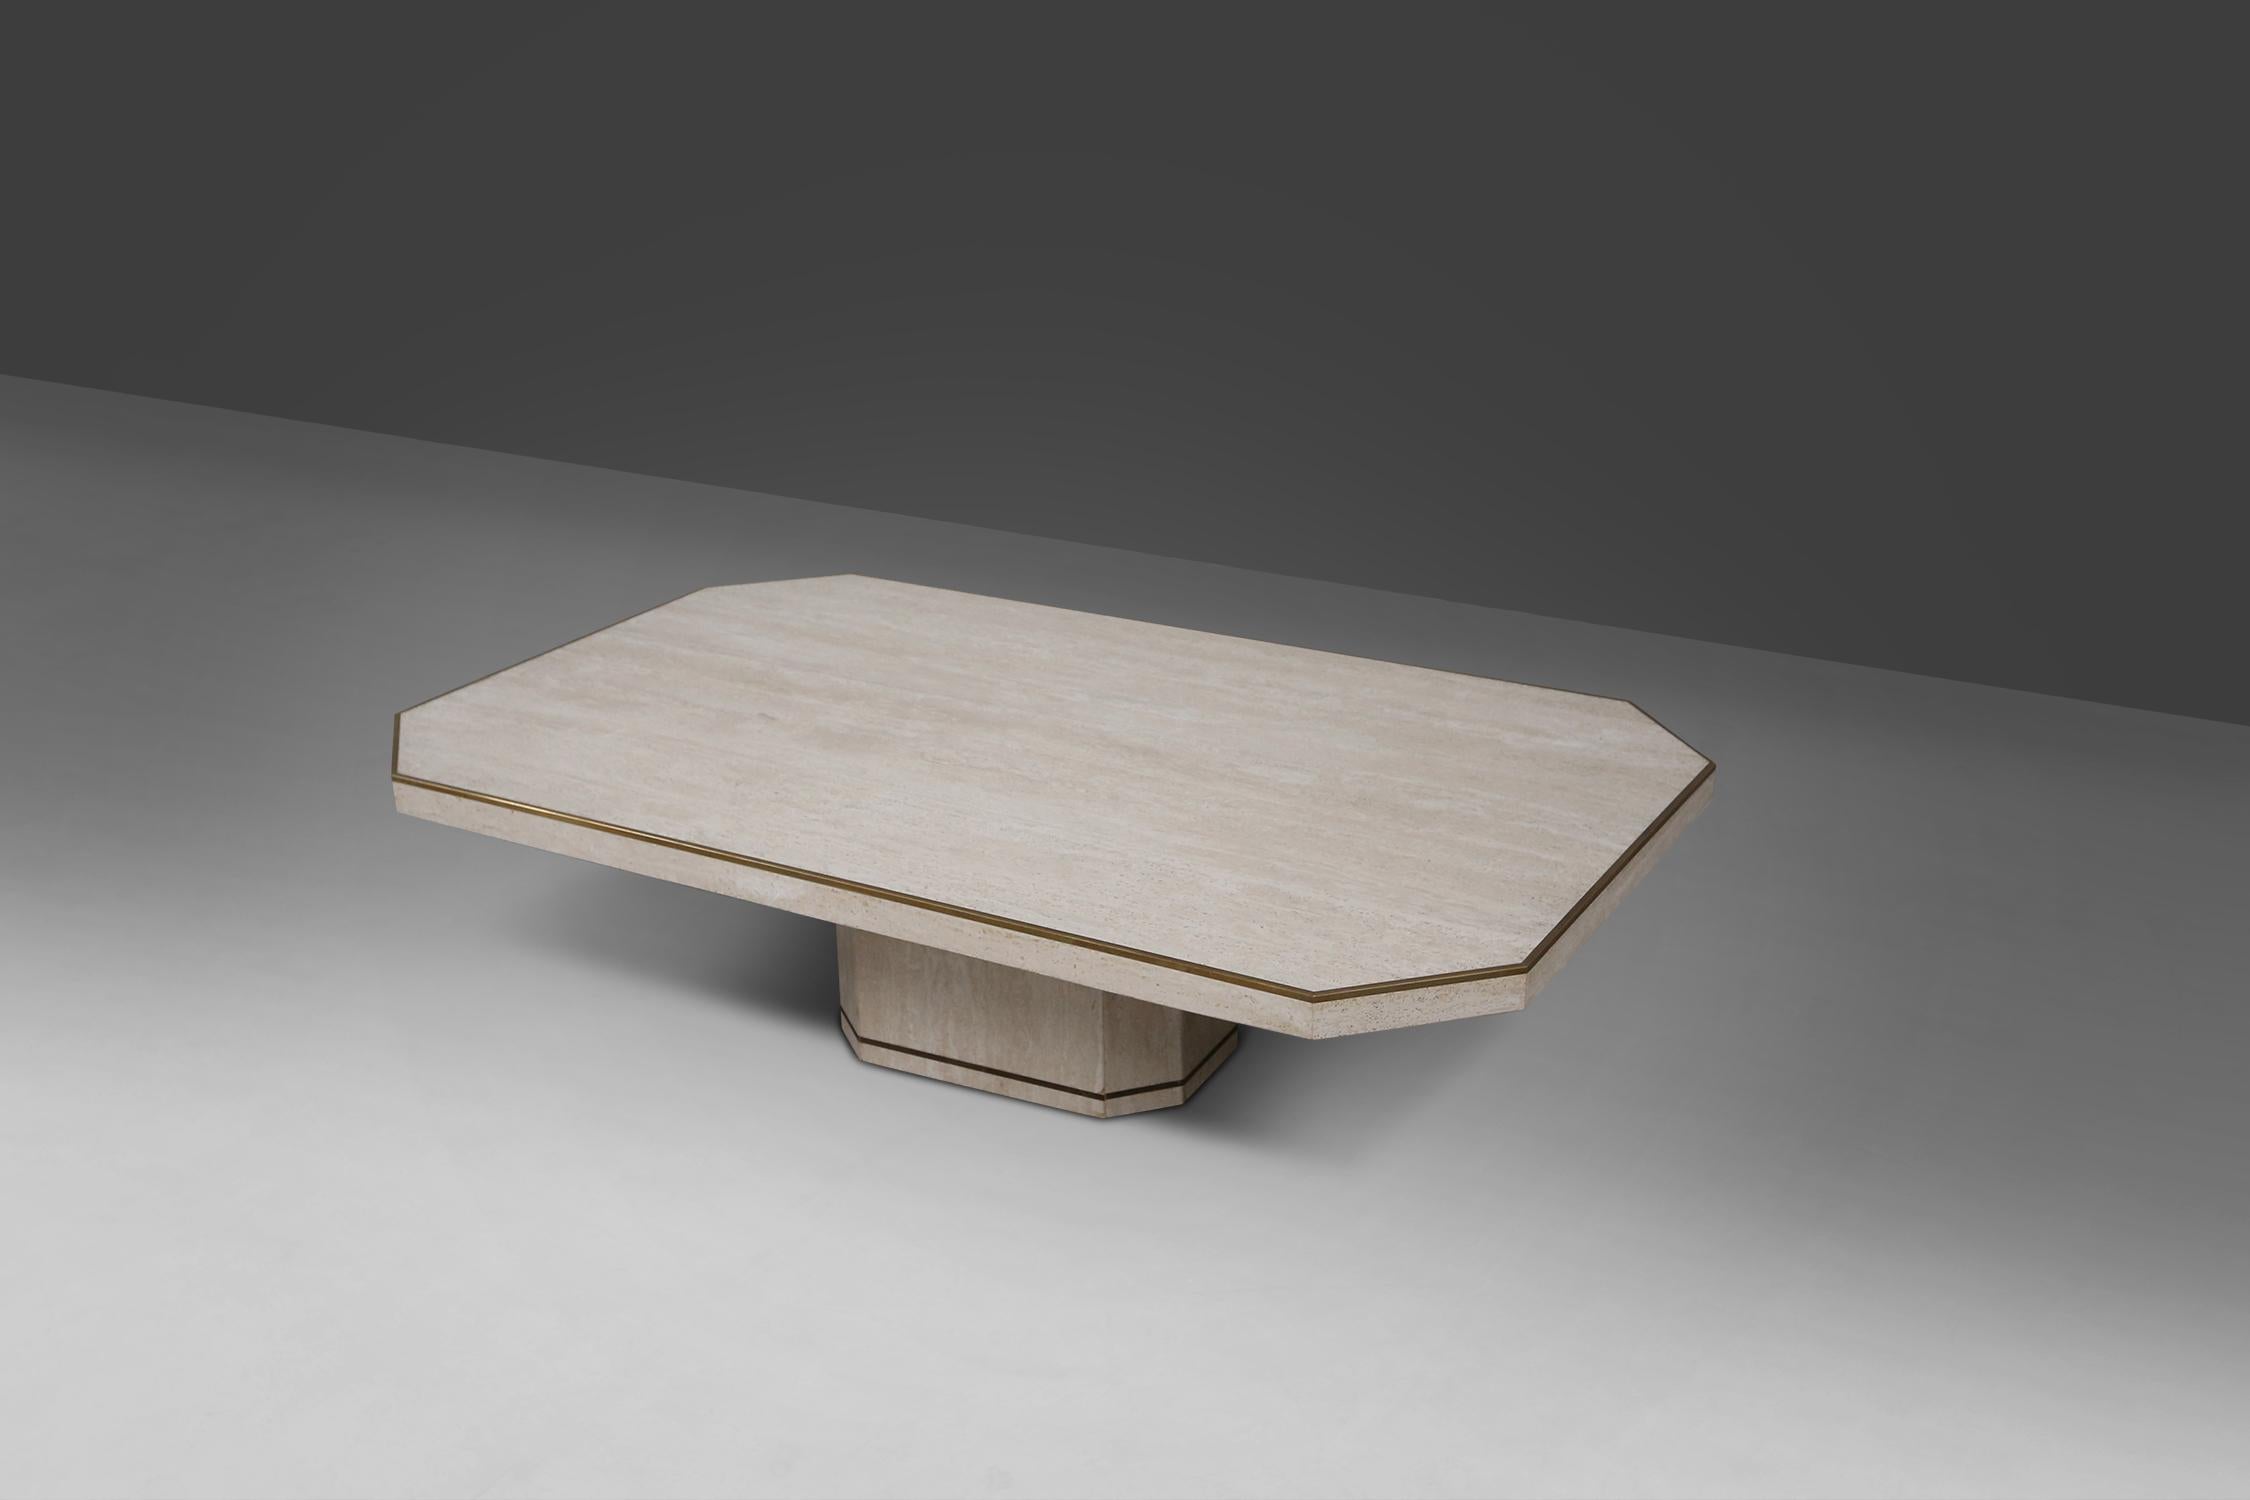 Willy Rizzo Travertine Coffee Table For Sale 5